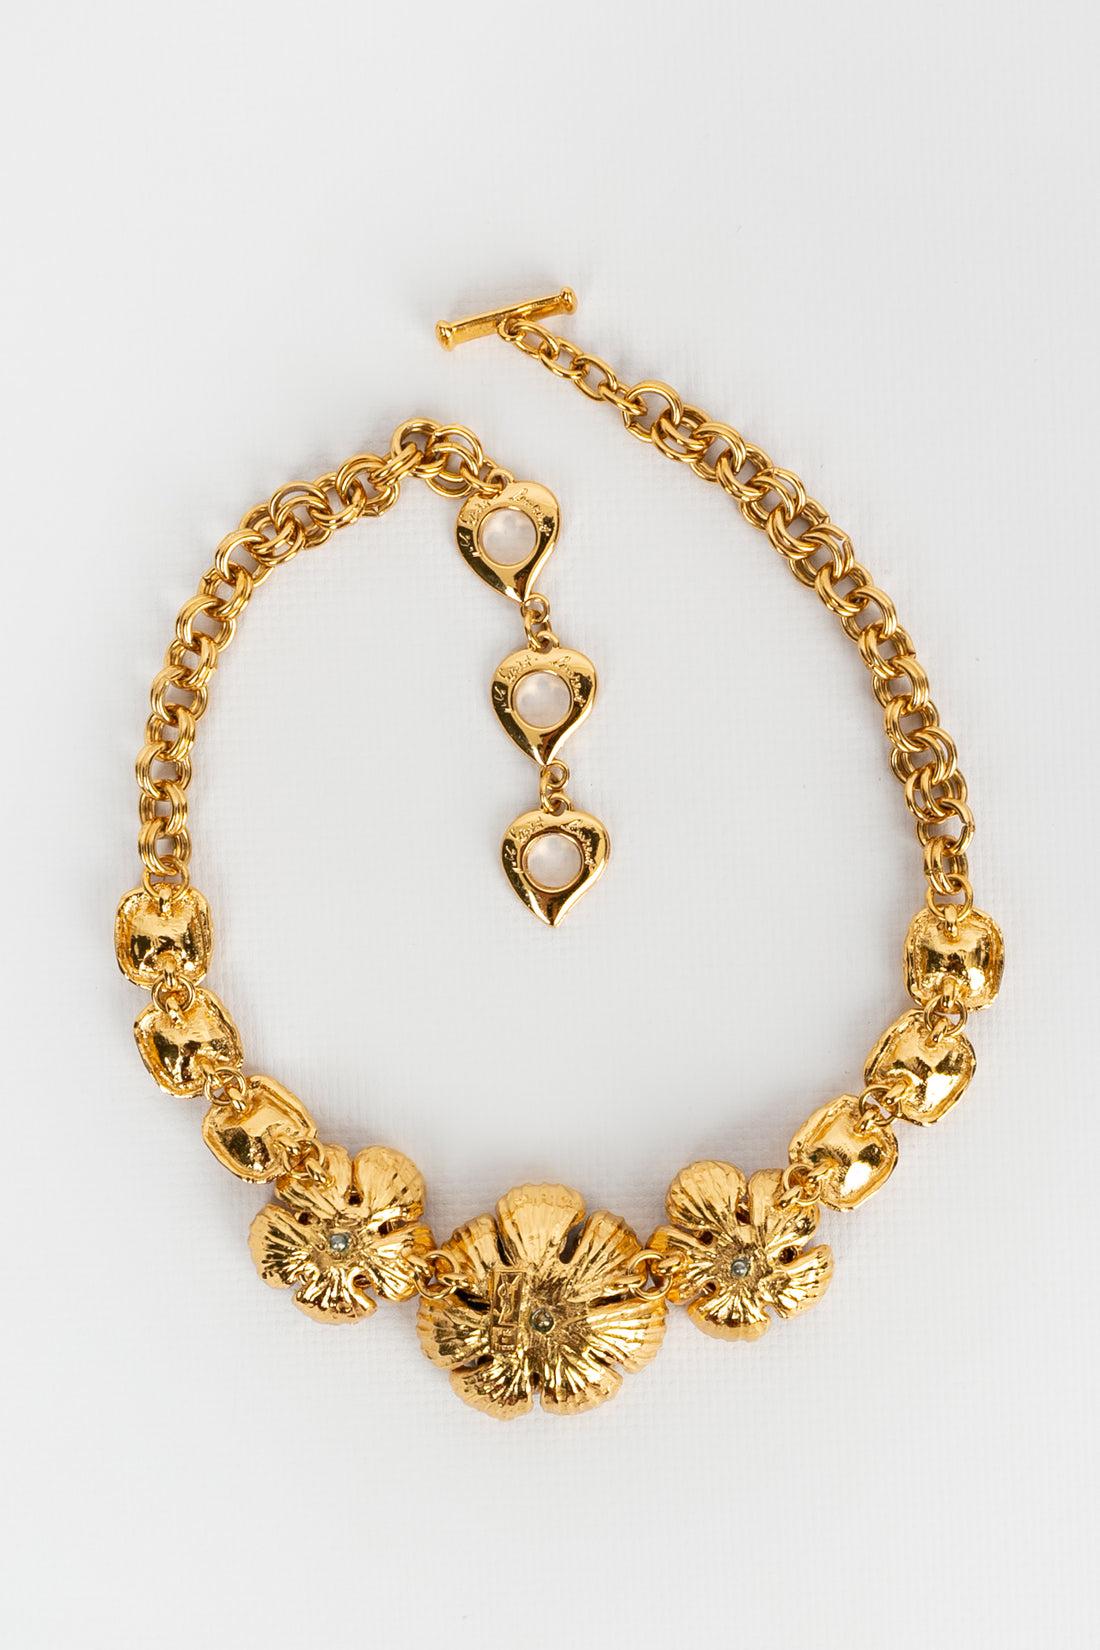 Women's Yves Saint Laurent Flower Necklace in Gilded Metal For Sale